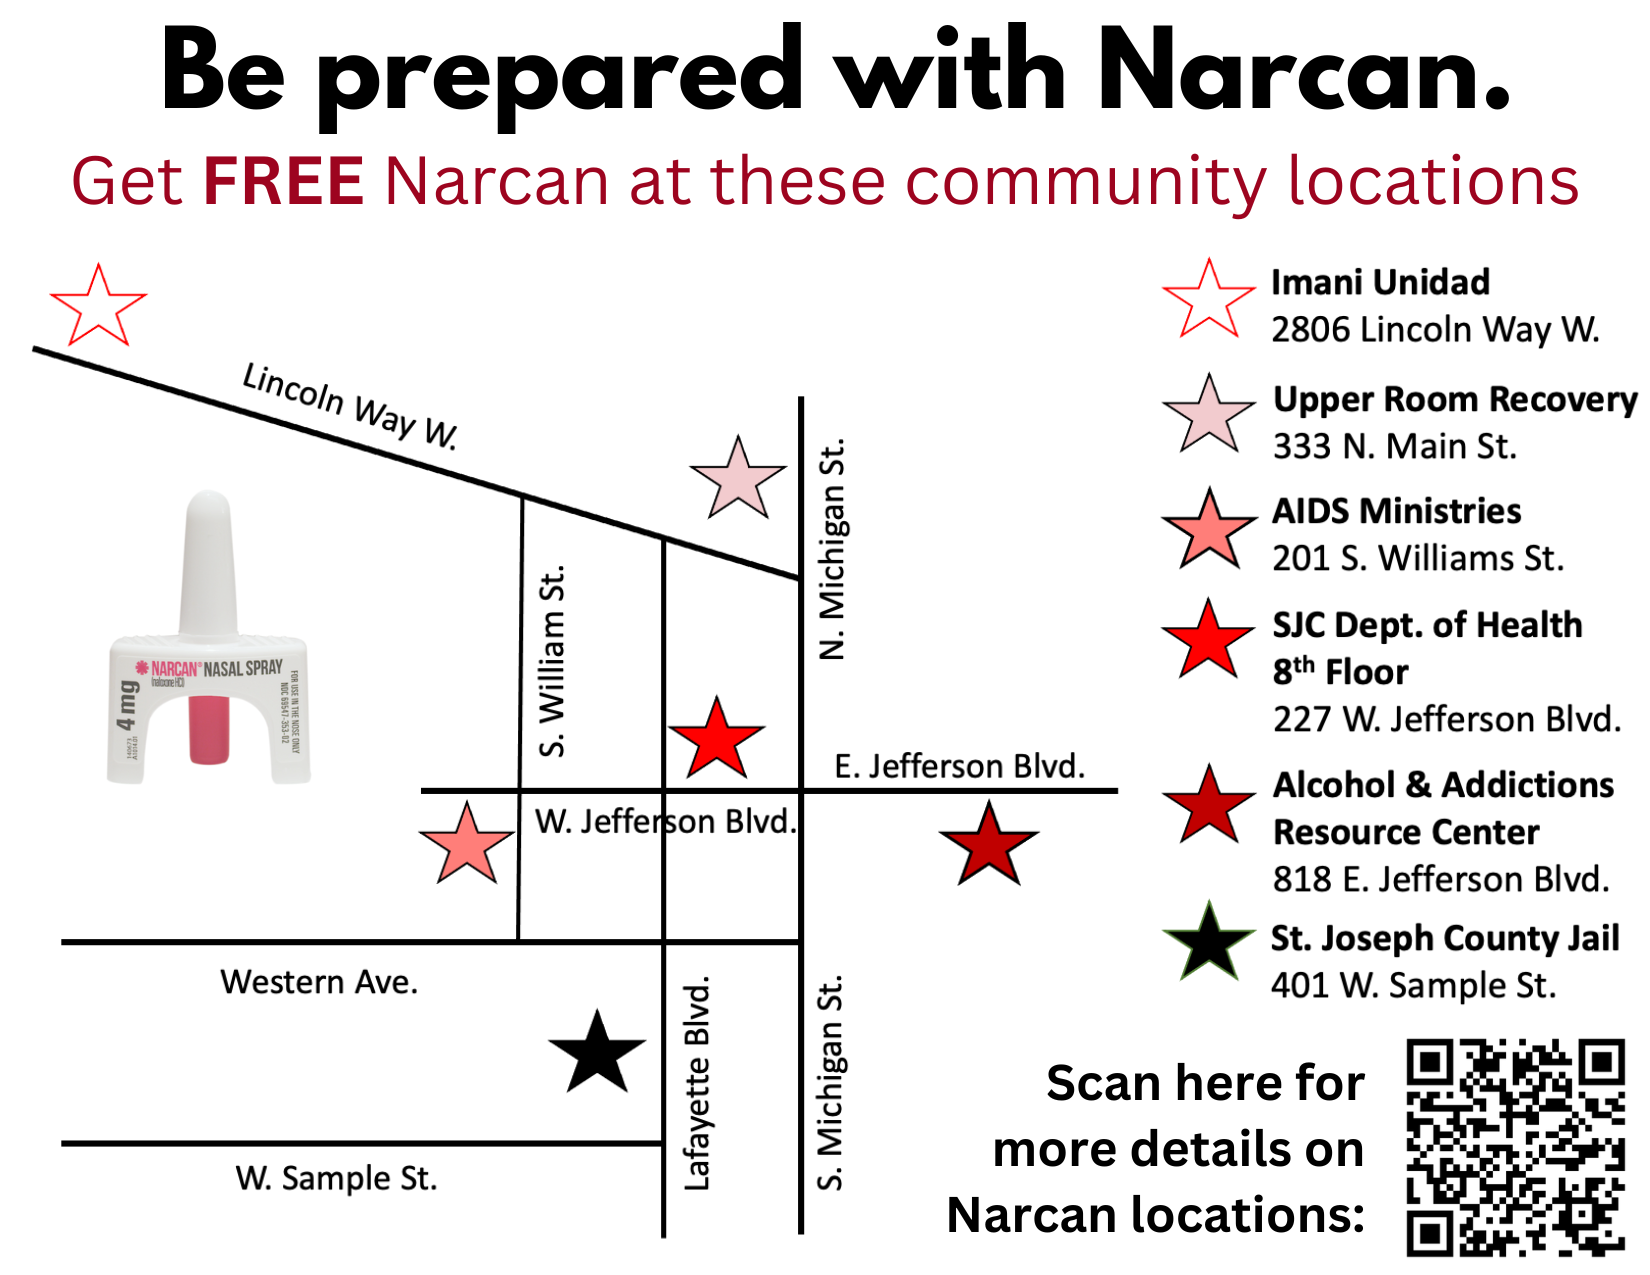 https://www.scribblemaps.com/maps/view/Naloxone-Locations-in-South-Bend-IN/22HiYBfm7s